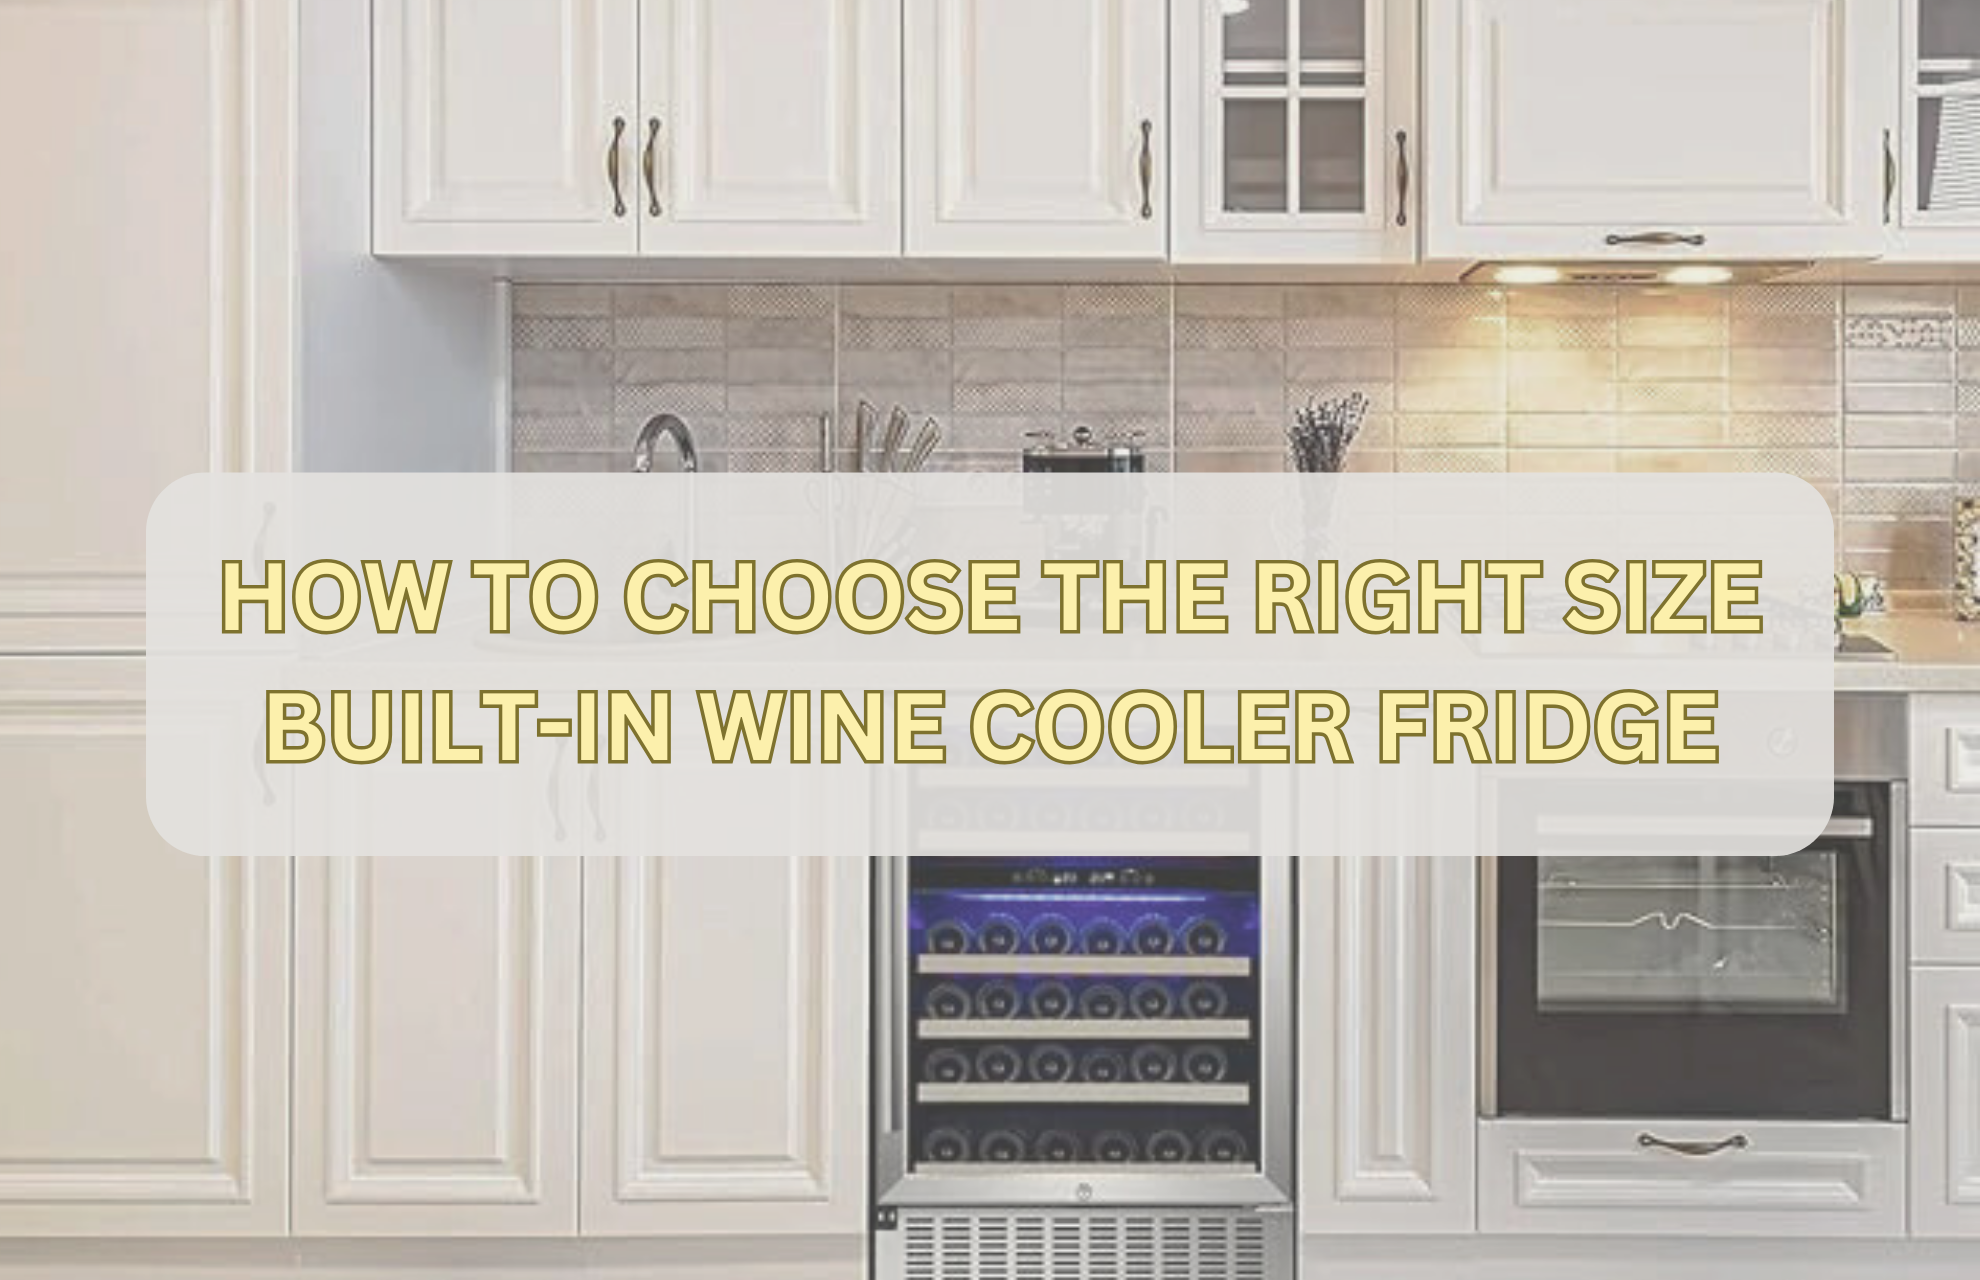 HOW TO CHOOSE THE RIGHT SIZE BUILT-IN WINE COOLER FRIDGE